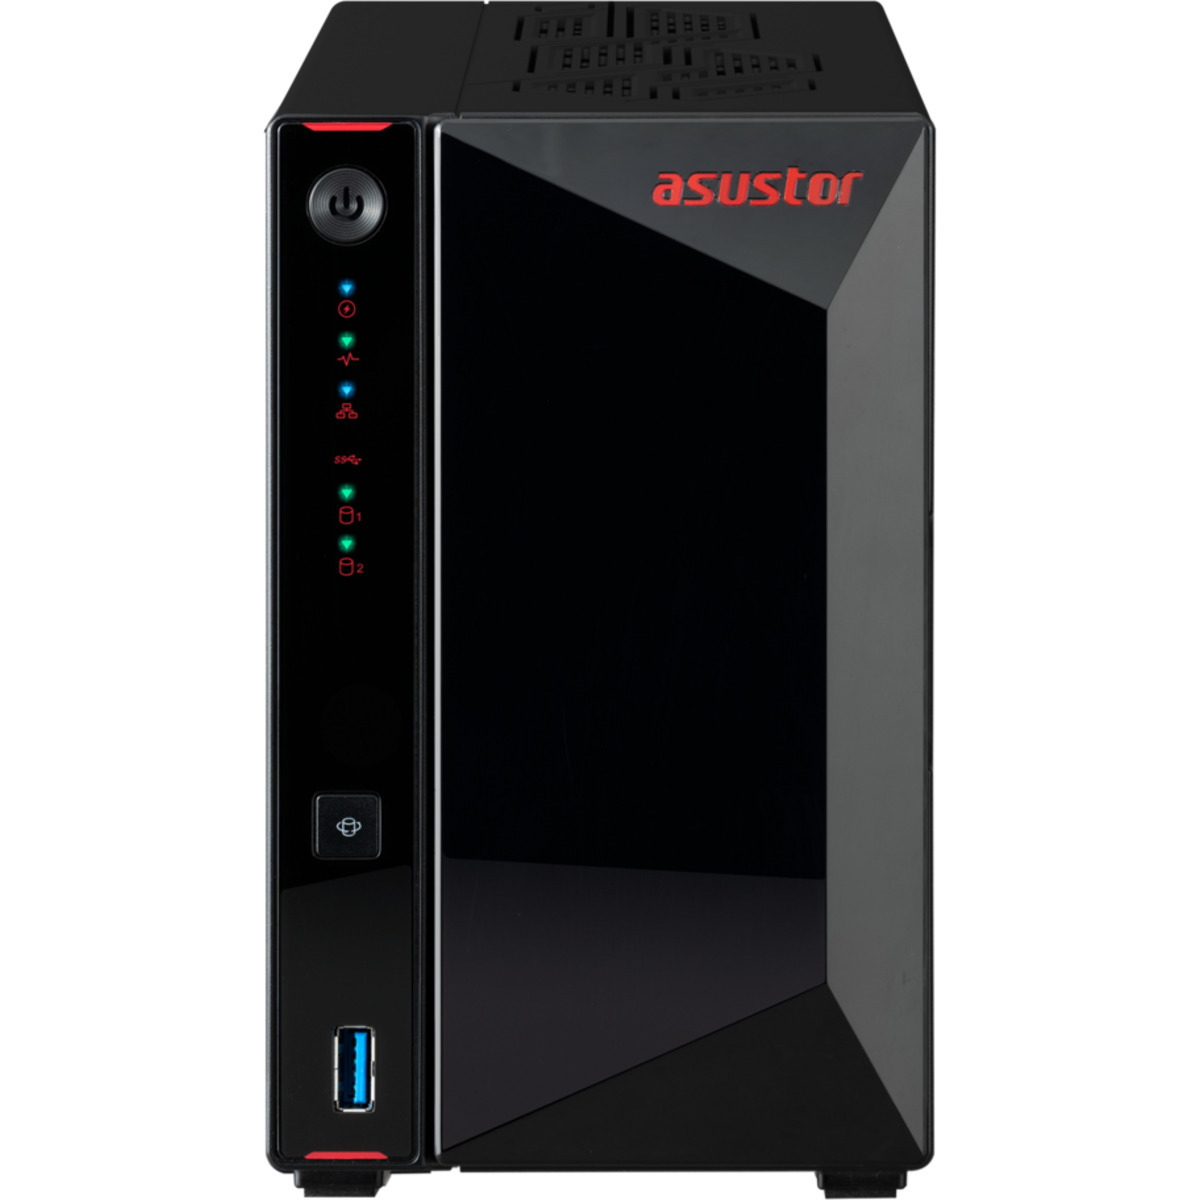 ASUSTOR Nimbustor 2 Gen2 AS5402T 1tb 2-Bay Desktop Multimedia / Power User / Business NAS - Network Attached Storage Device 2x500gb Samsung 870 EVO MZ-77E500BAM 2.5 560/530MB/s SATA 6Gb/s SSD CONSUMER Class Drives Installed - Burn-In Tested - FREE RAM UPGRADE Nimbustor 2 Gen2 AS5402T